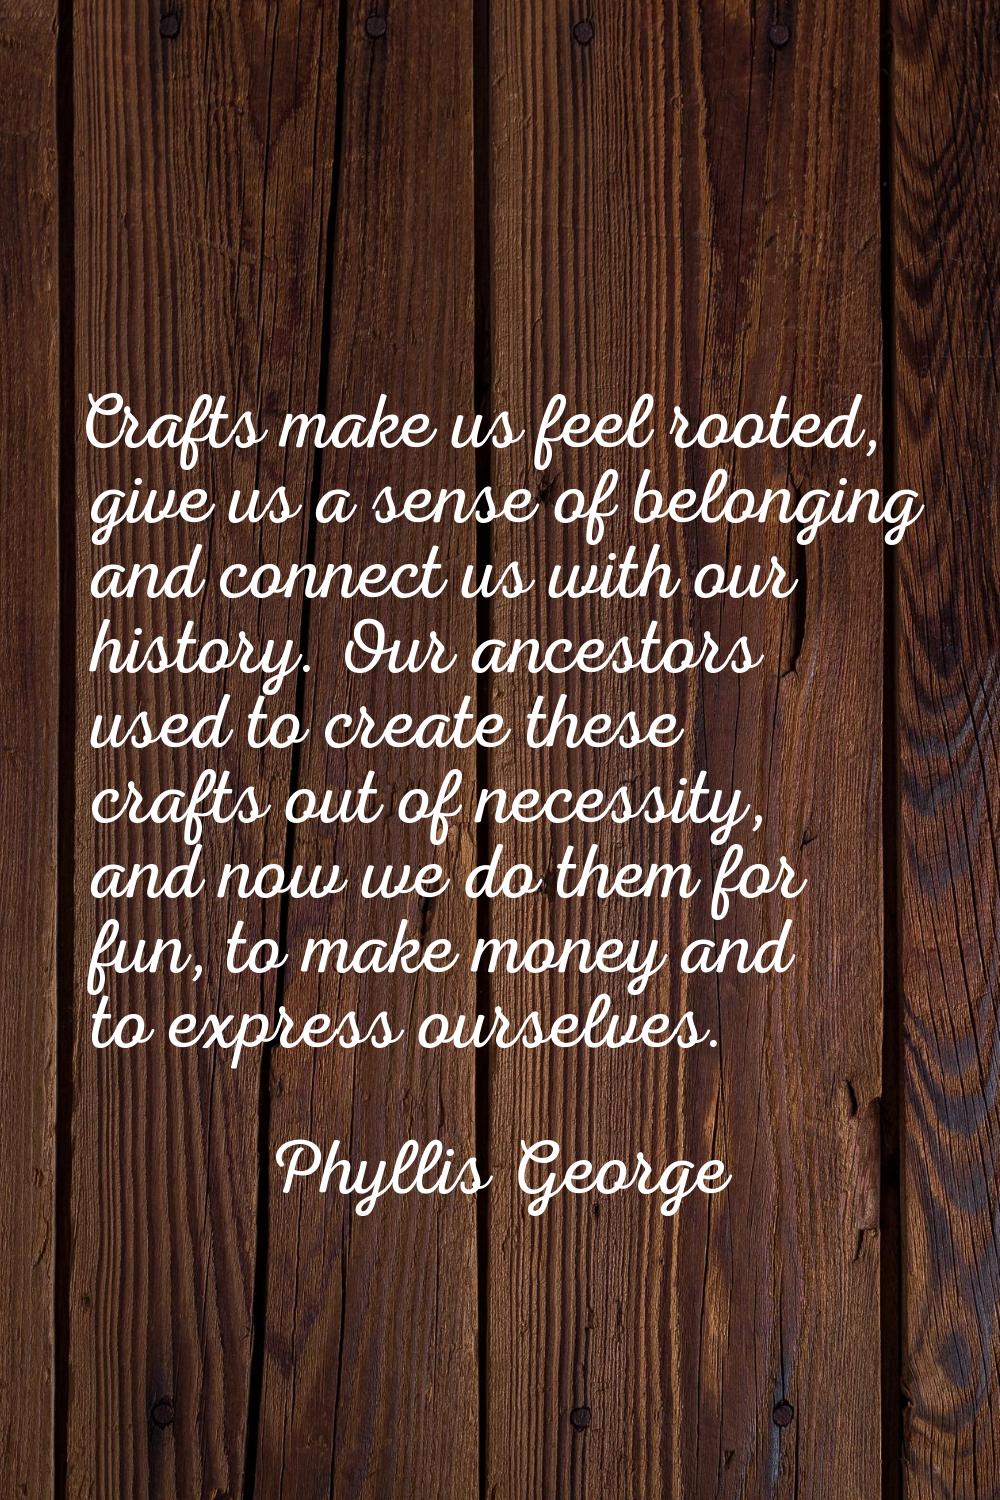 Crafts make us feel rooted, give us a sense of belonging and connect us with our history. Our ances